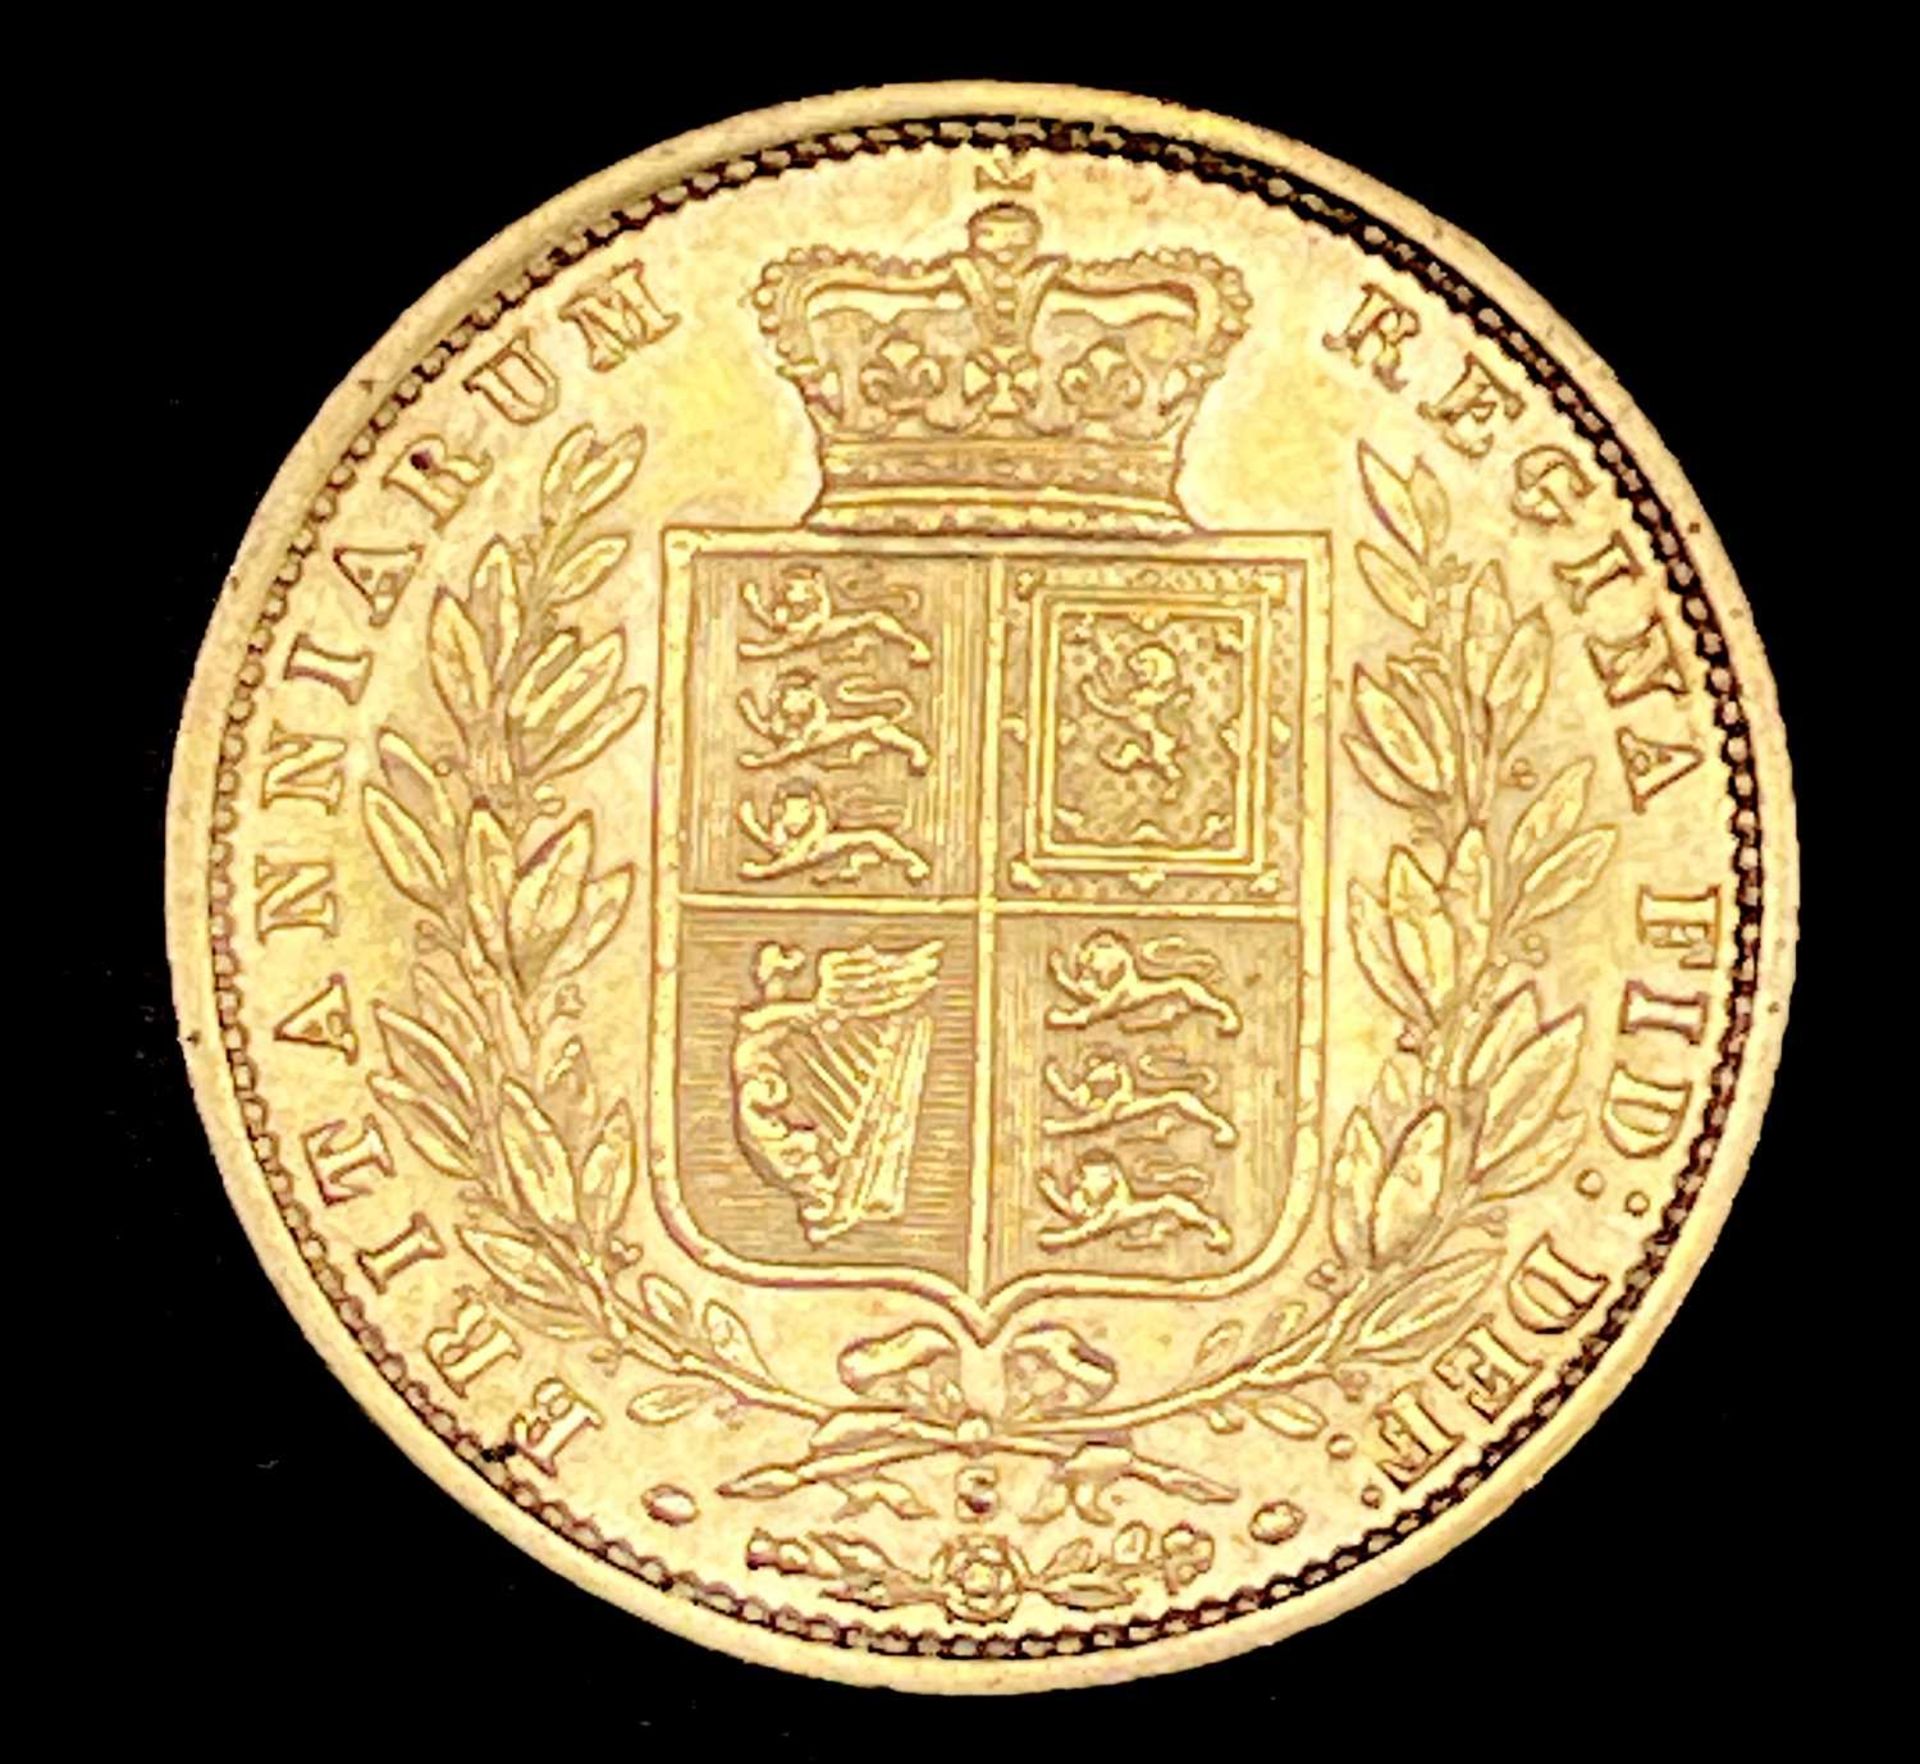 Great Britain Gold Sovereign 1877 Shield Bank. Sydney Mint. Condition: please request a condition